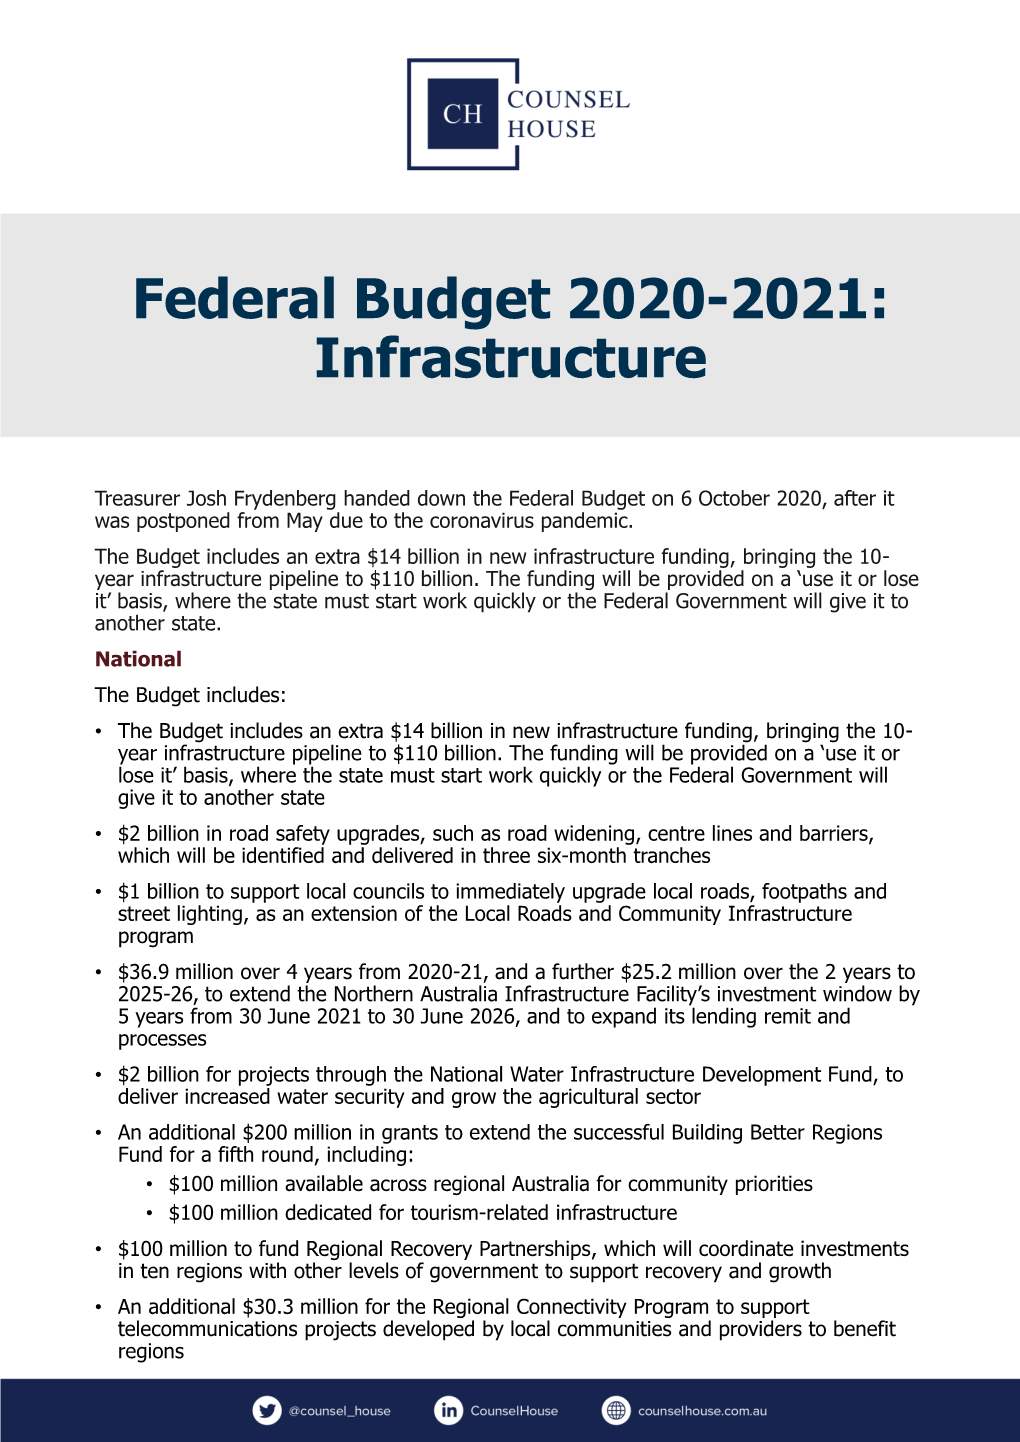 Federal Budget 2020-2021: Infrastructure